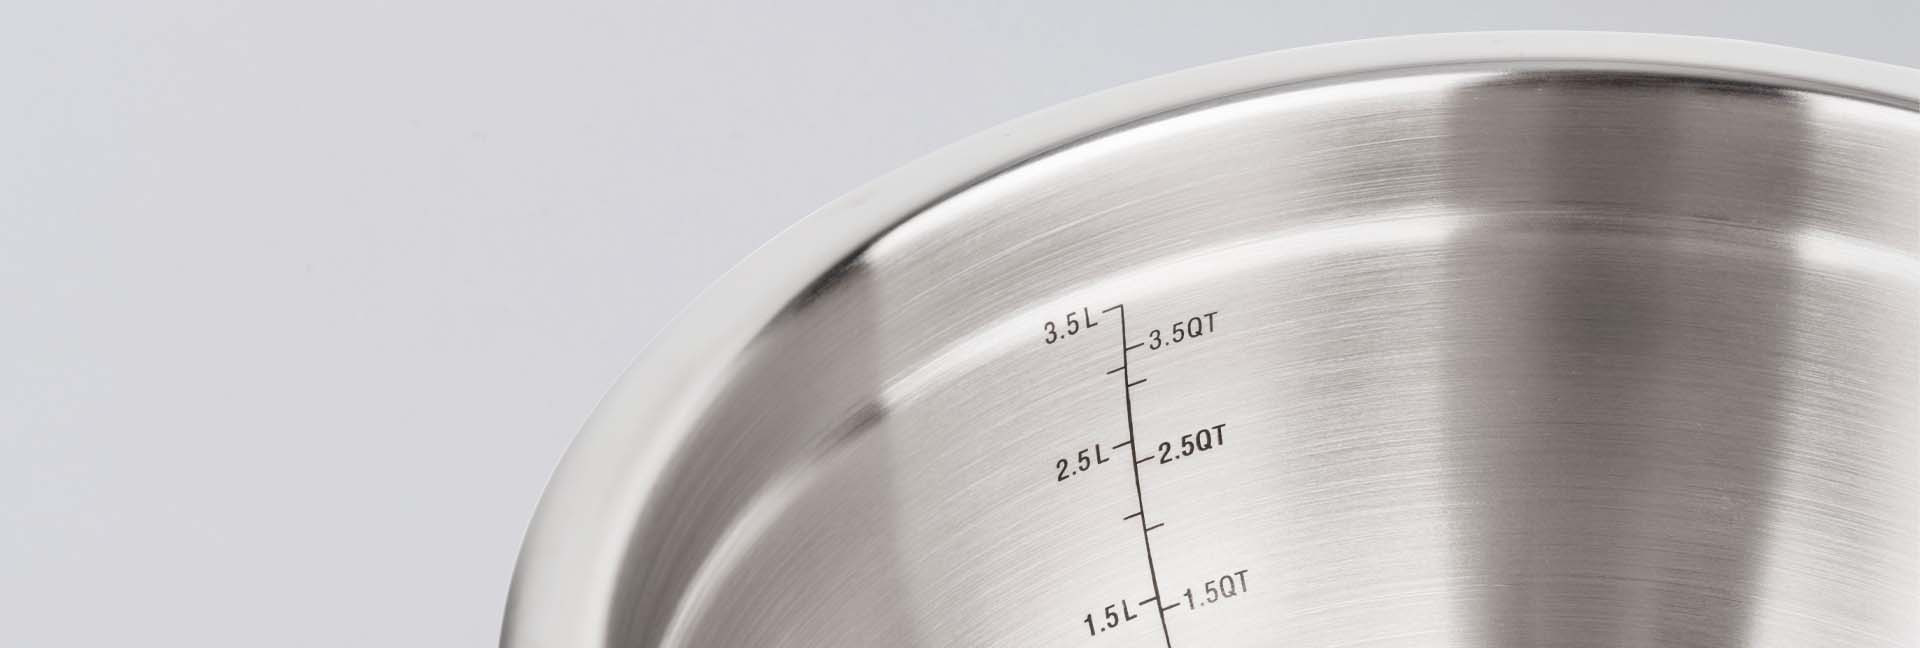 Stainless-Steel Silicon Bowl